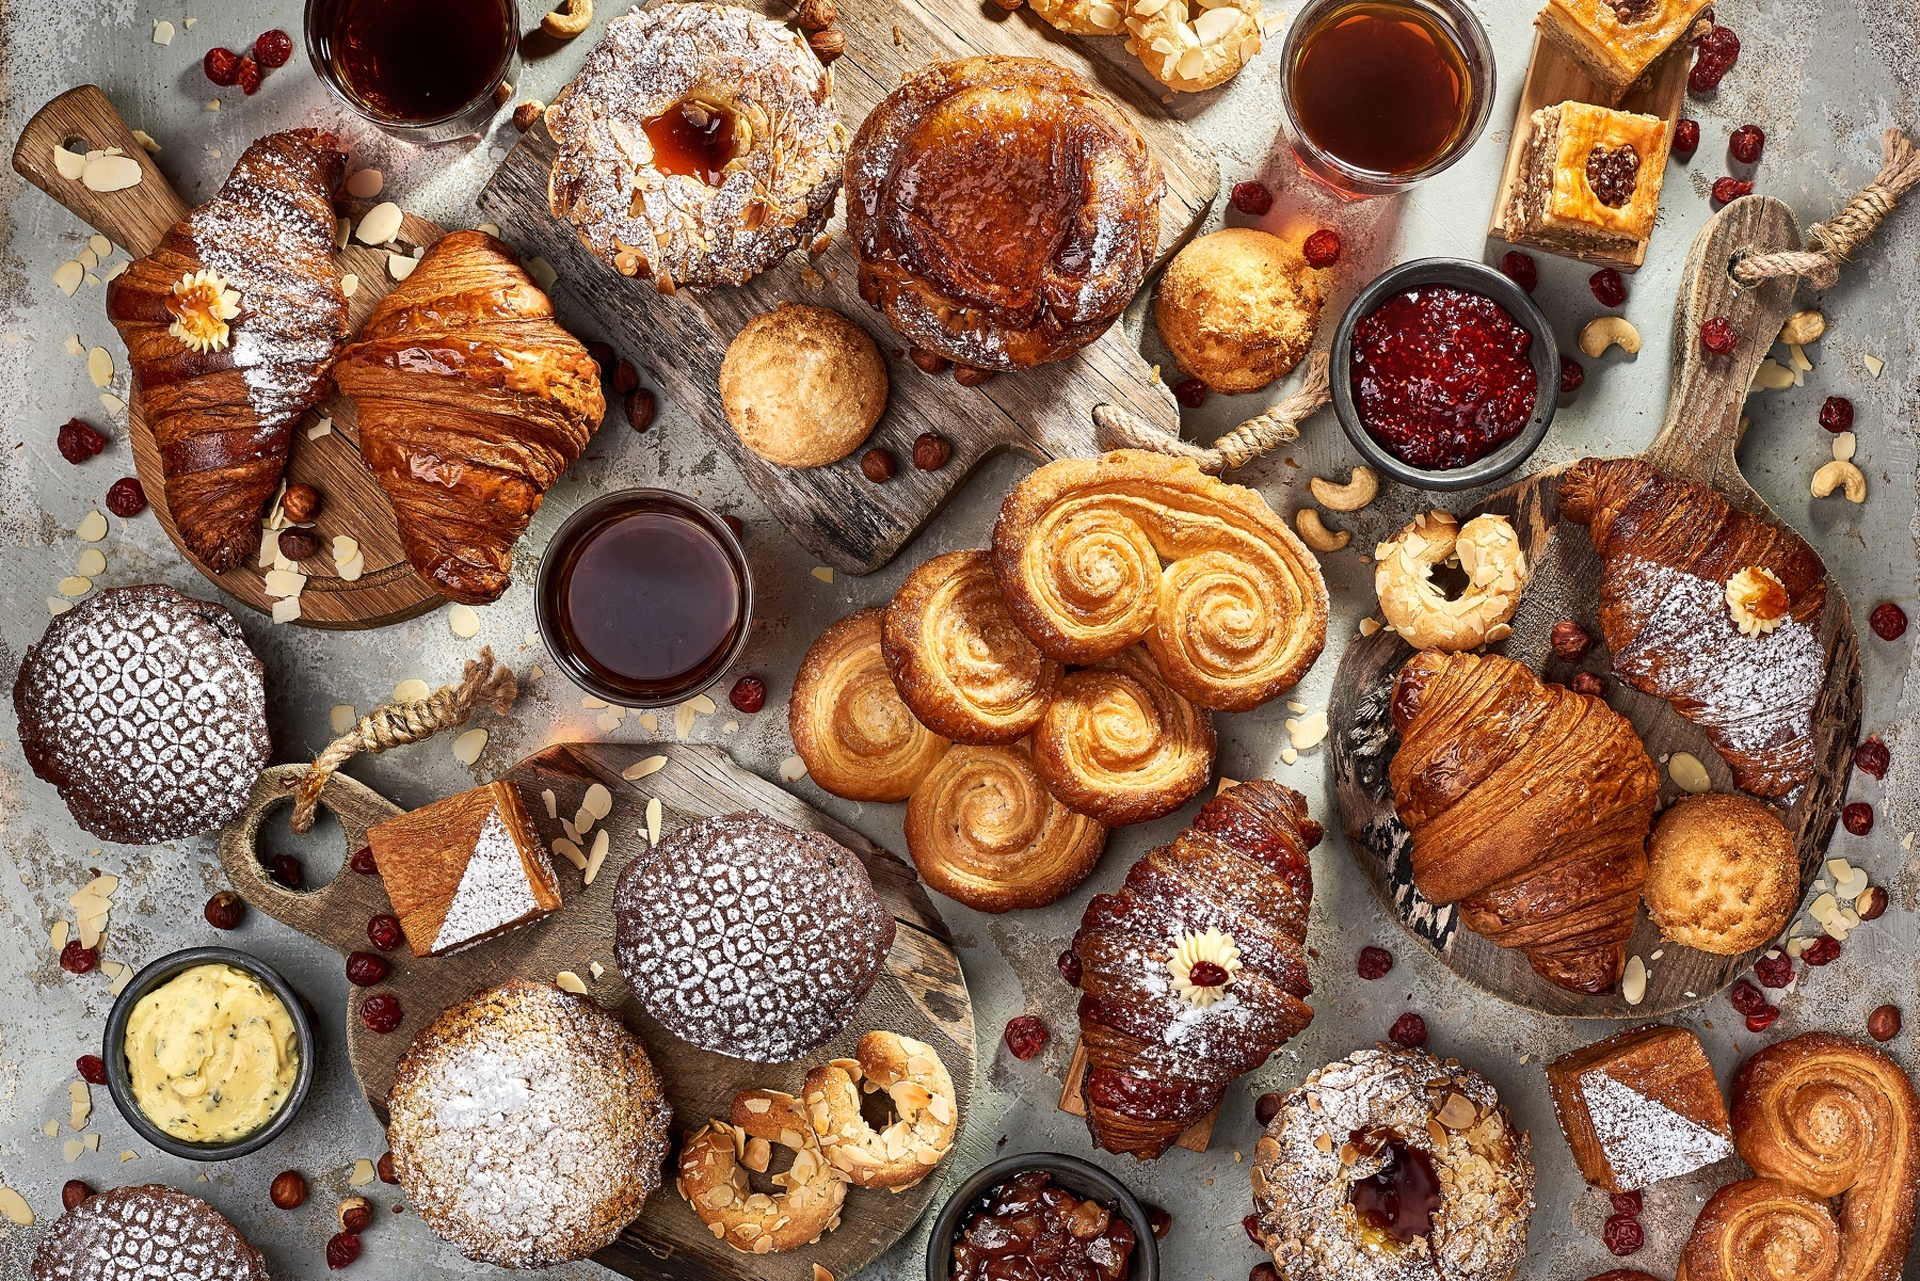 Croissant: A popular breakfast item in cafes, bakeries, and hotels, Viennoiserie. 1920x1290 HD Wallpaper.